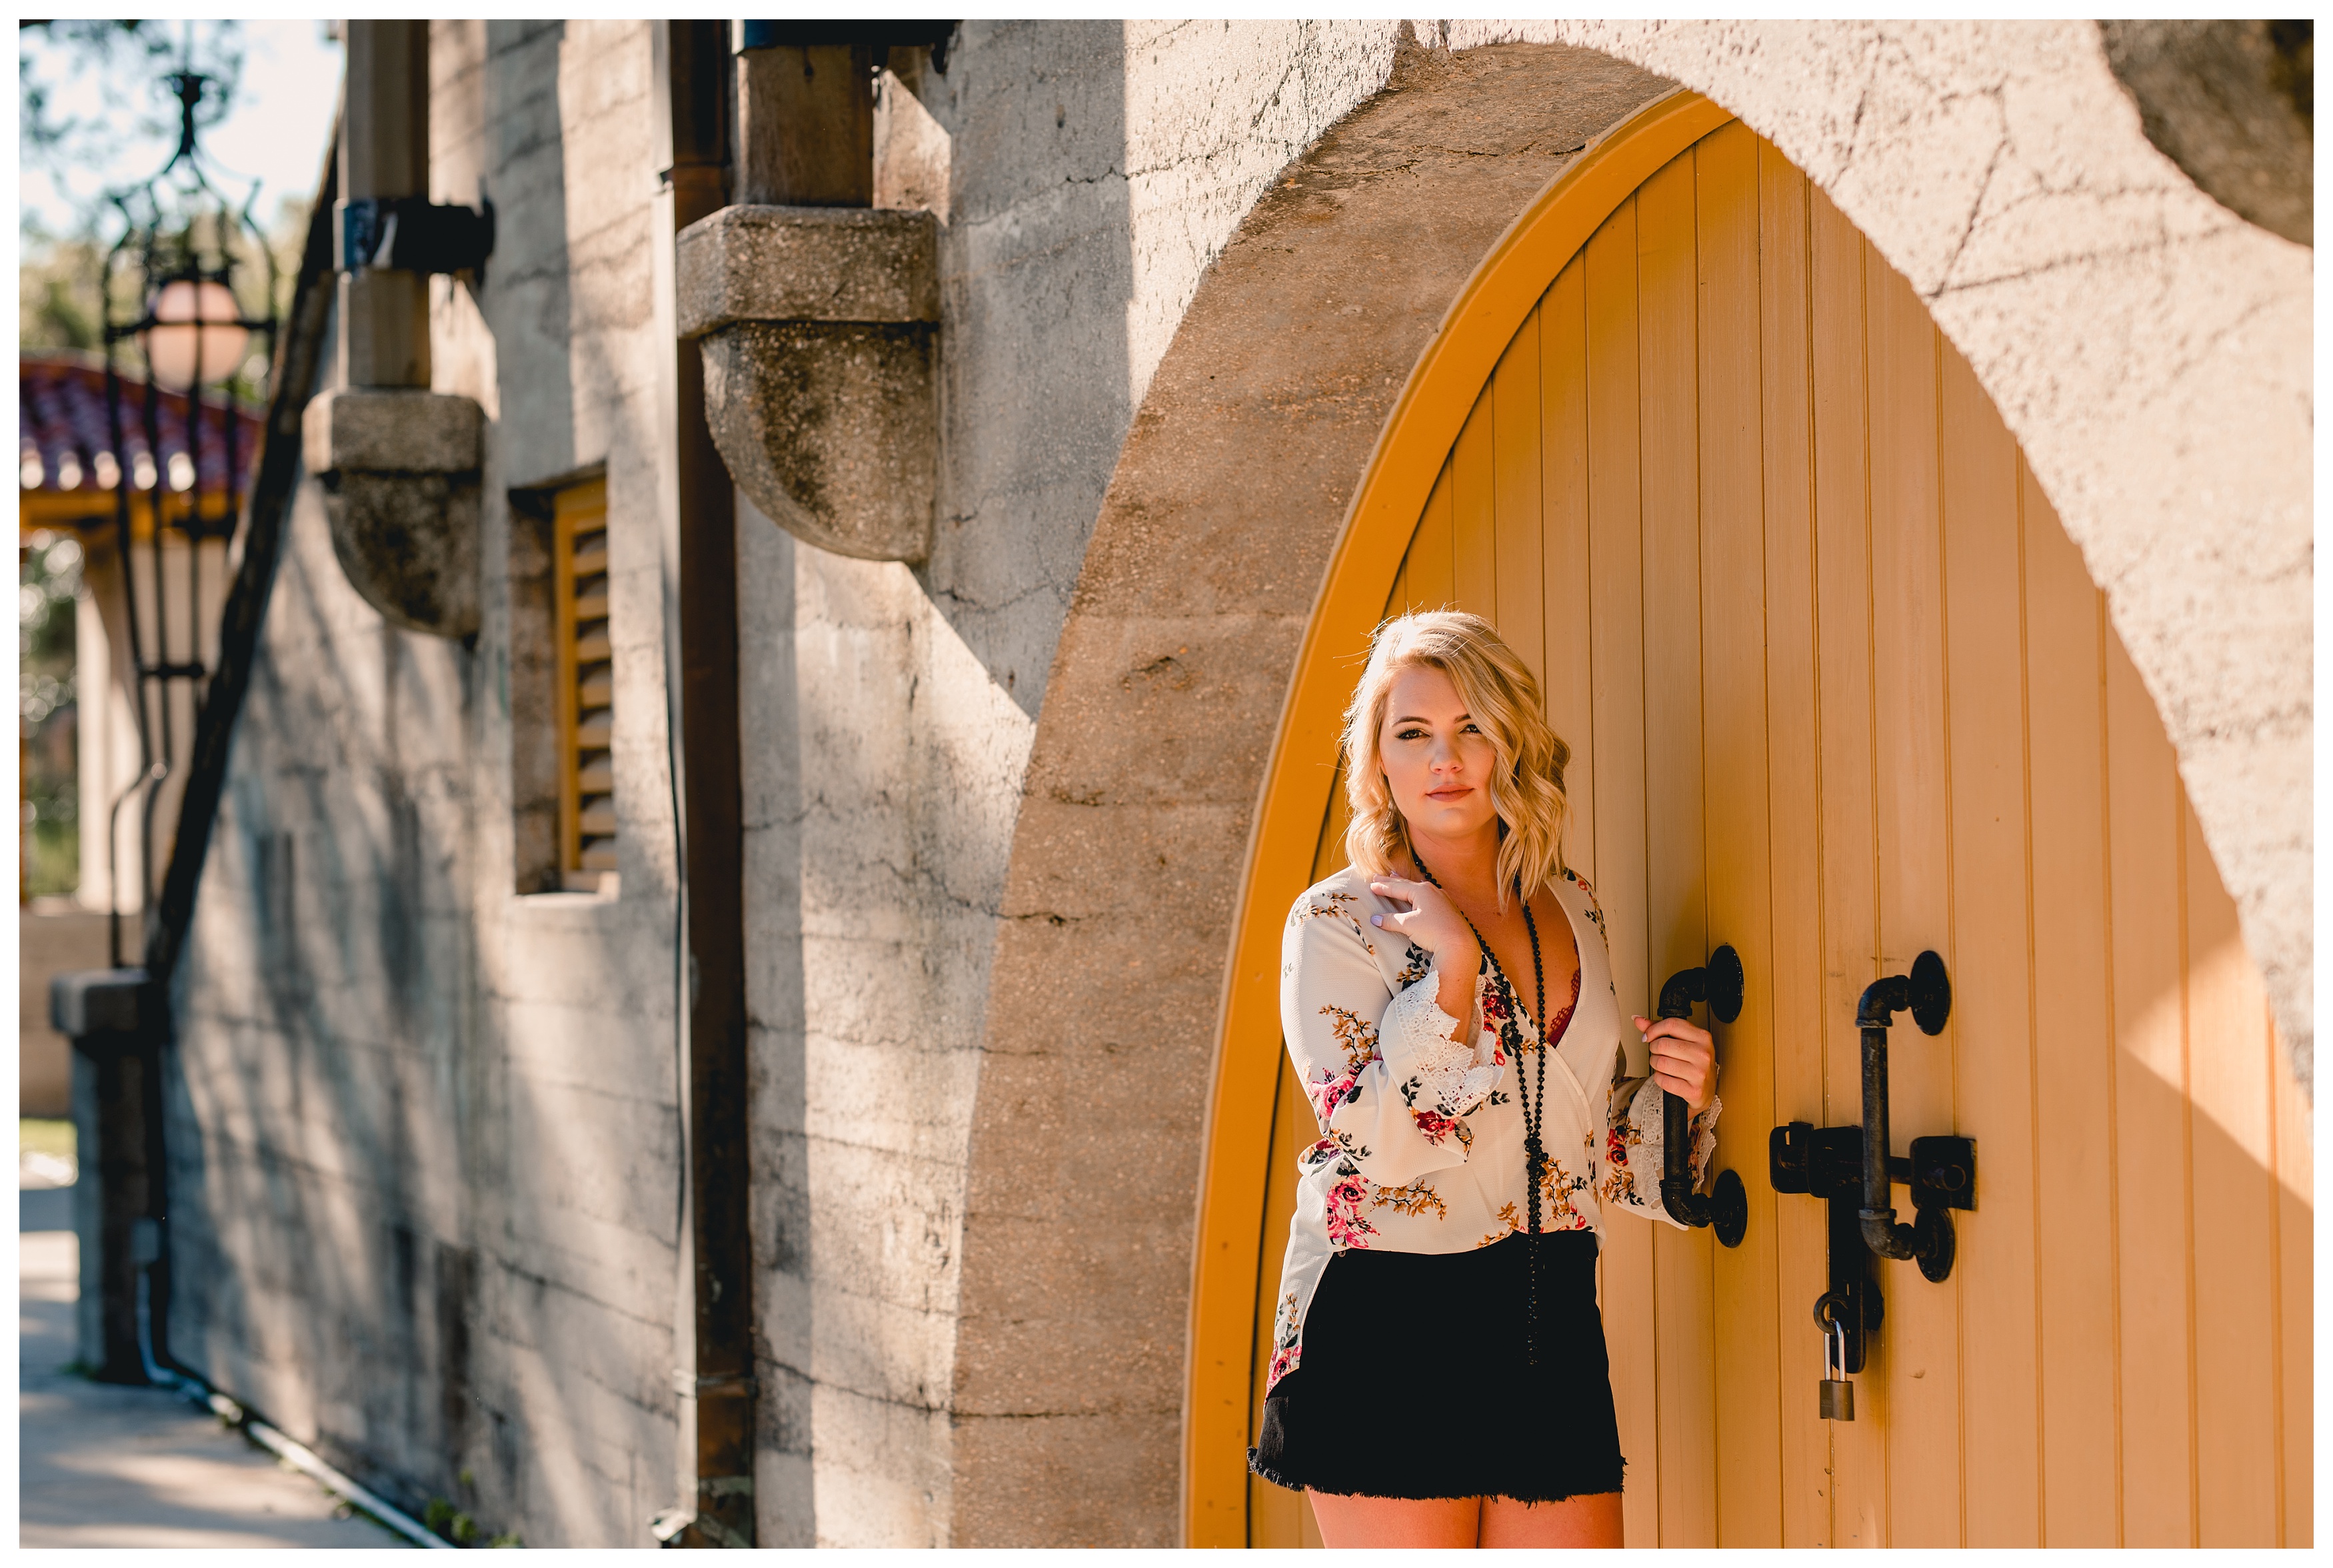 High school senior photography taken in St. Augustine, Florida. Shelly Williams Photography